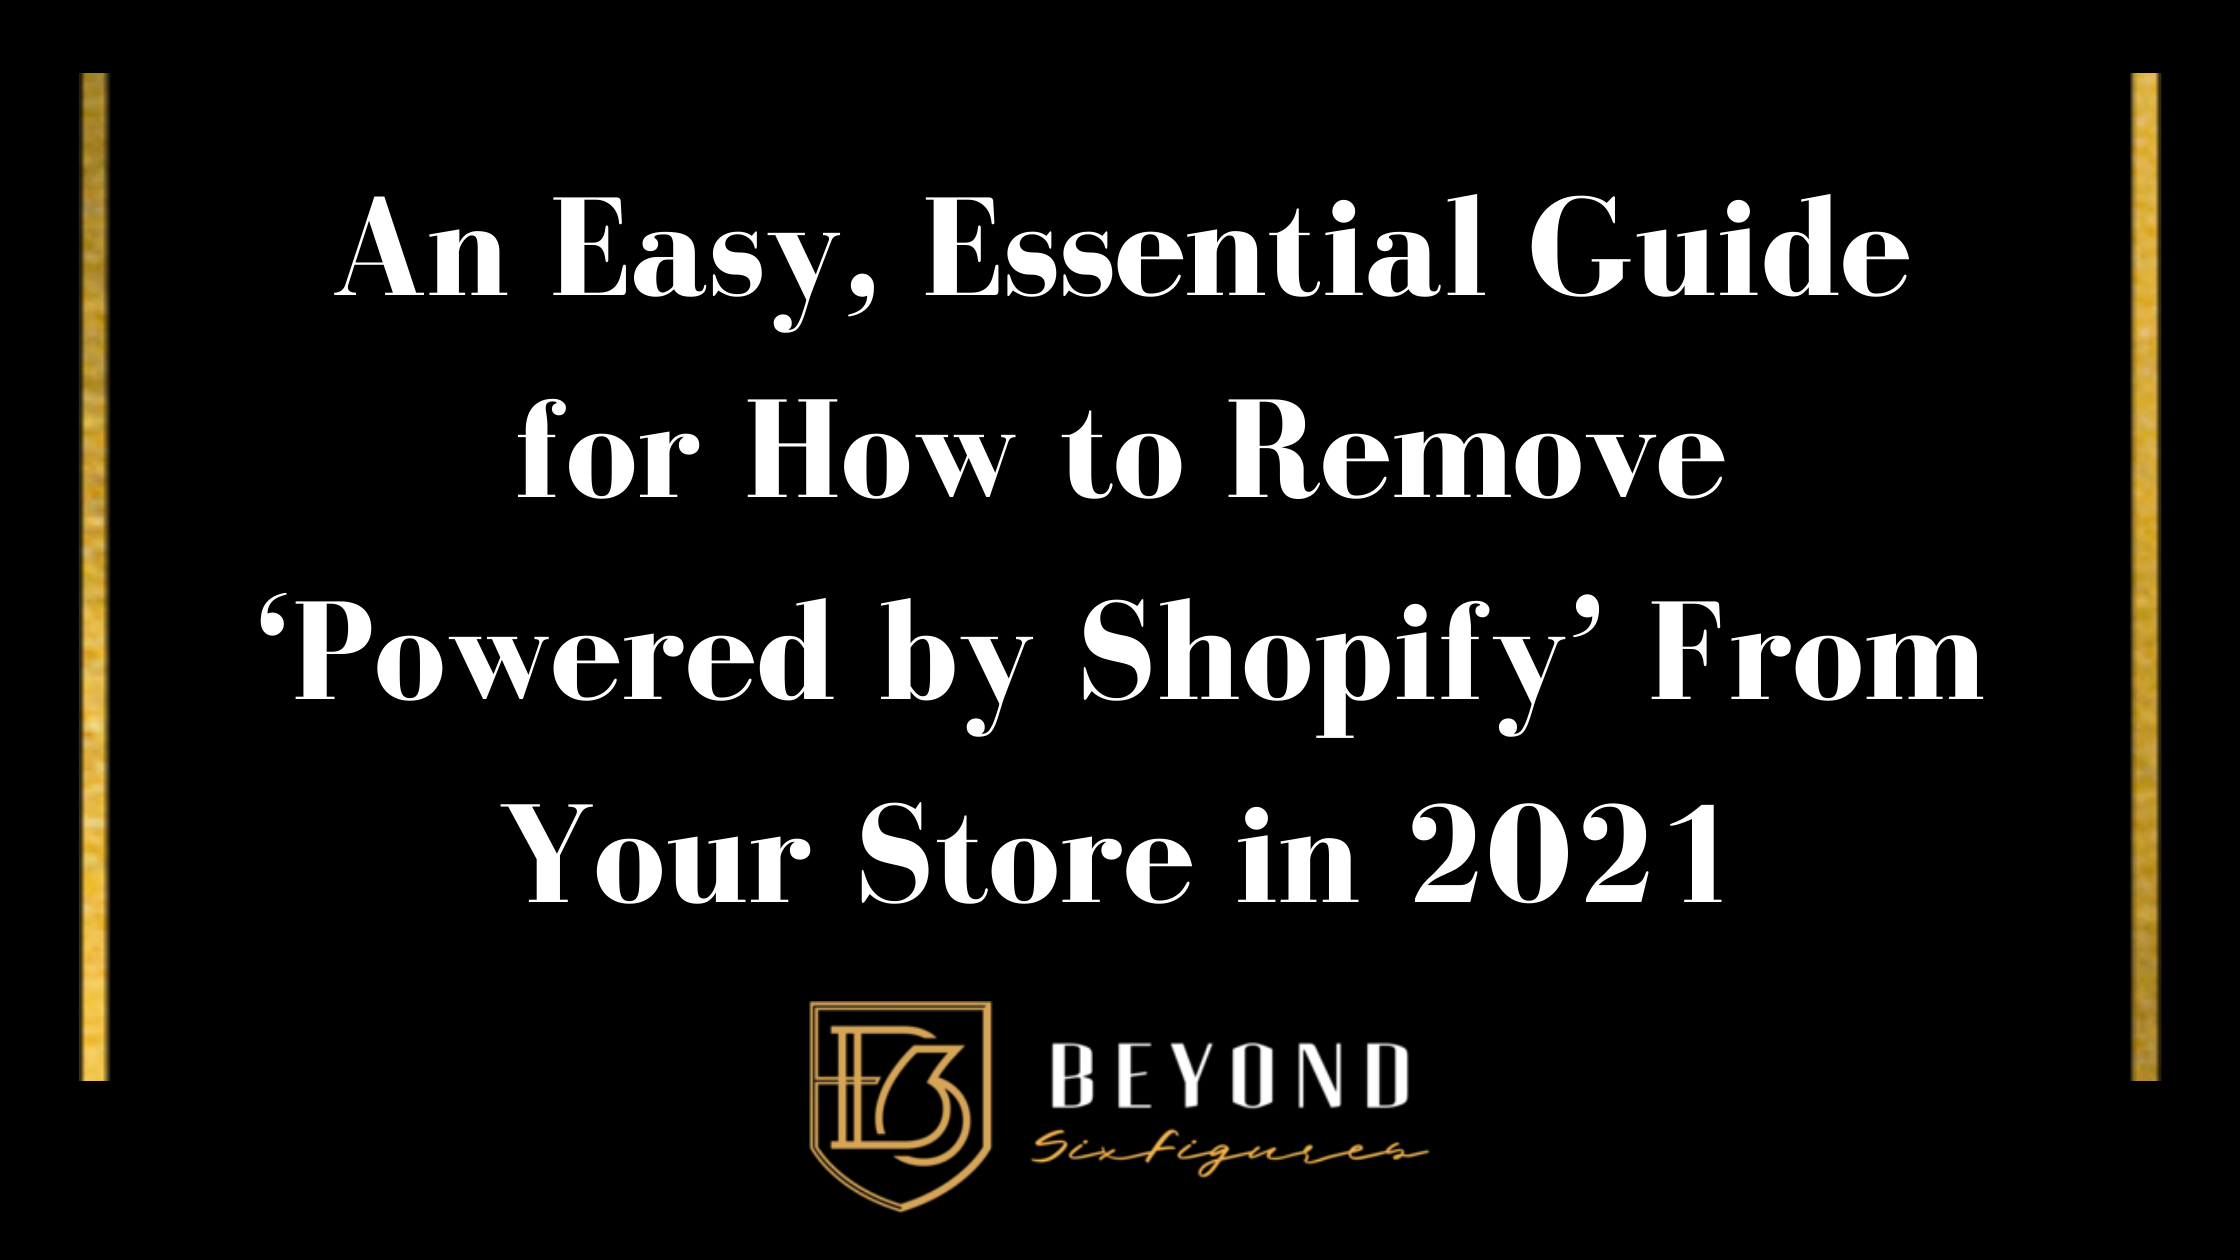 A visual of An Easy, Essential Guide for How to Remove ‘Powered by Shopify’ From Your Store in 2021